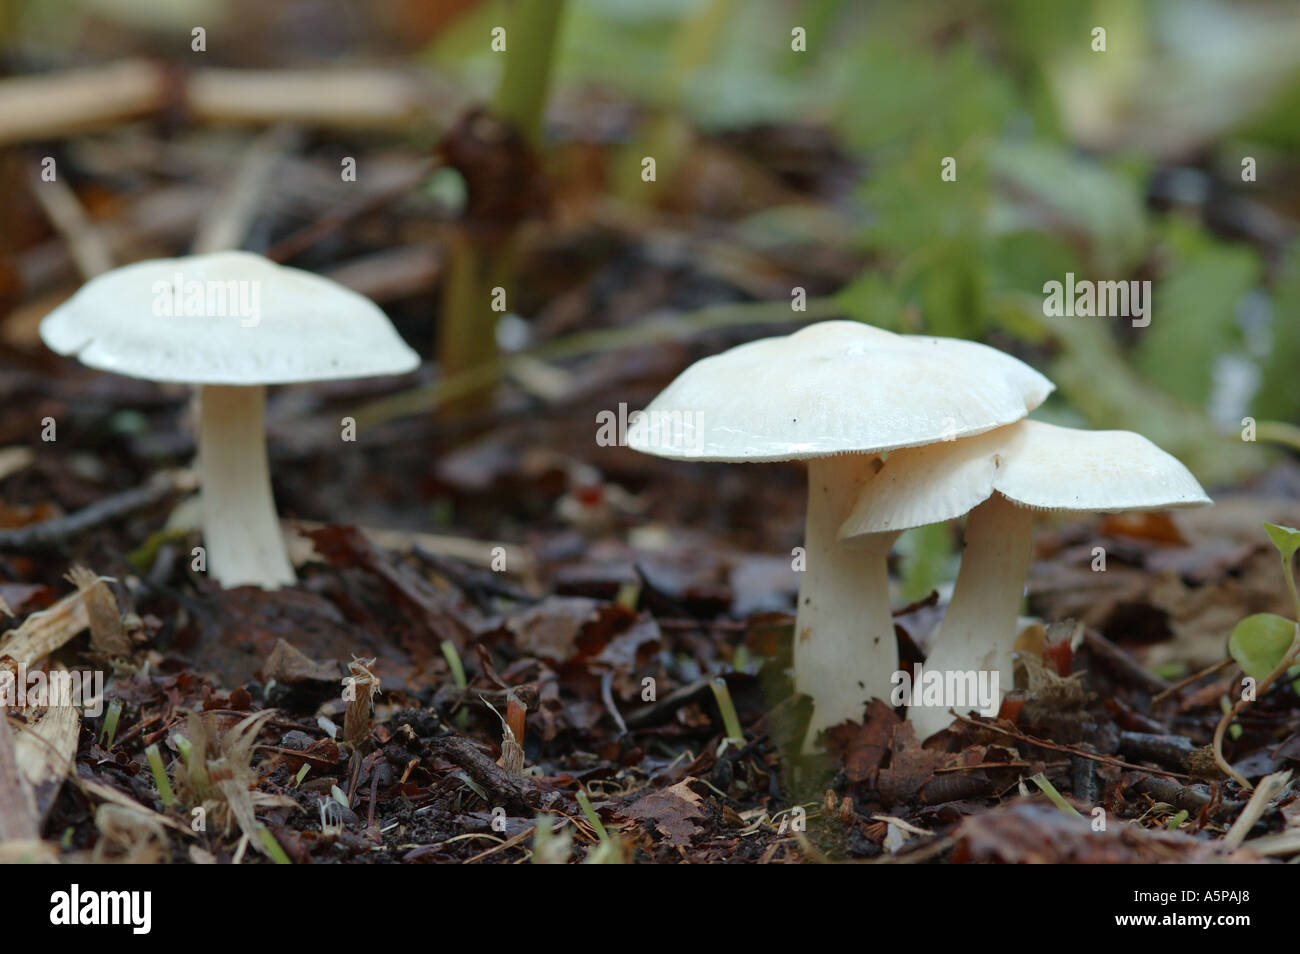 A group of white poisonous toadstools ( fungus , mushrooms ) Tricholoma album growing on the ground in the forest Stock Photo